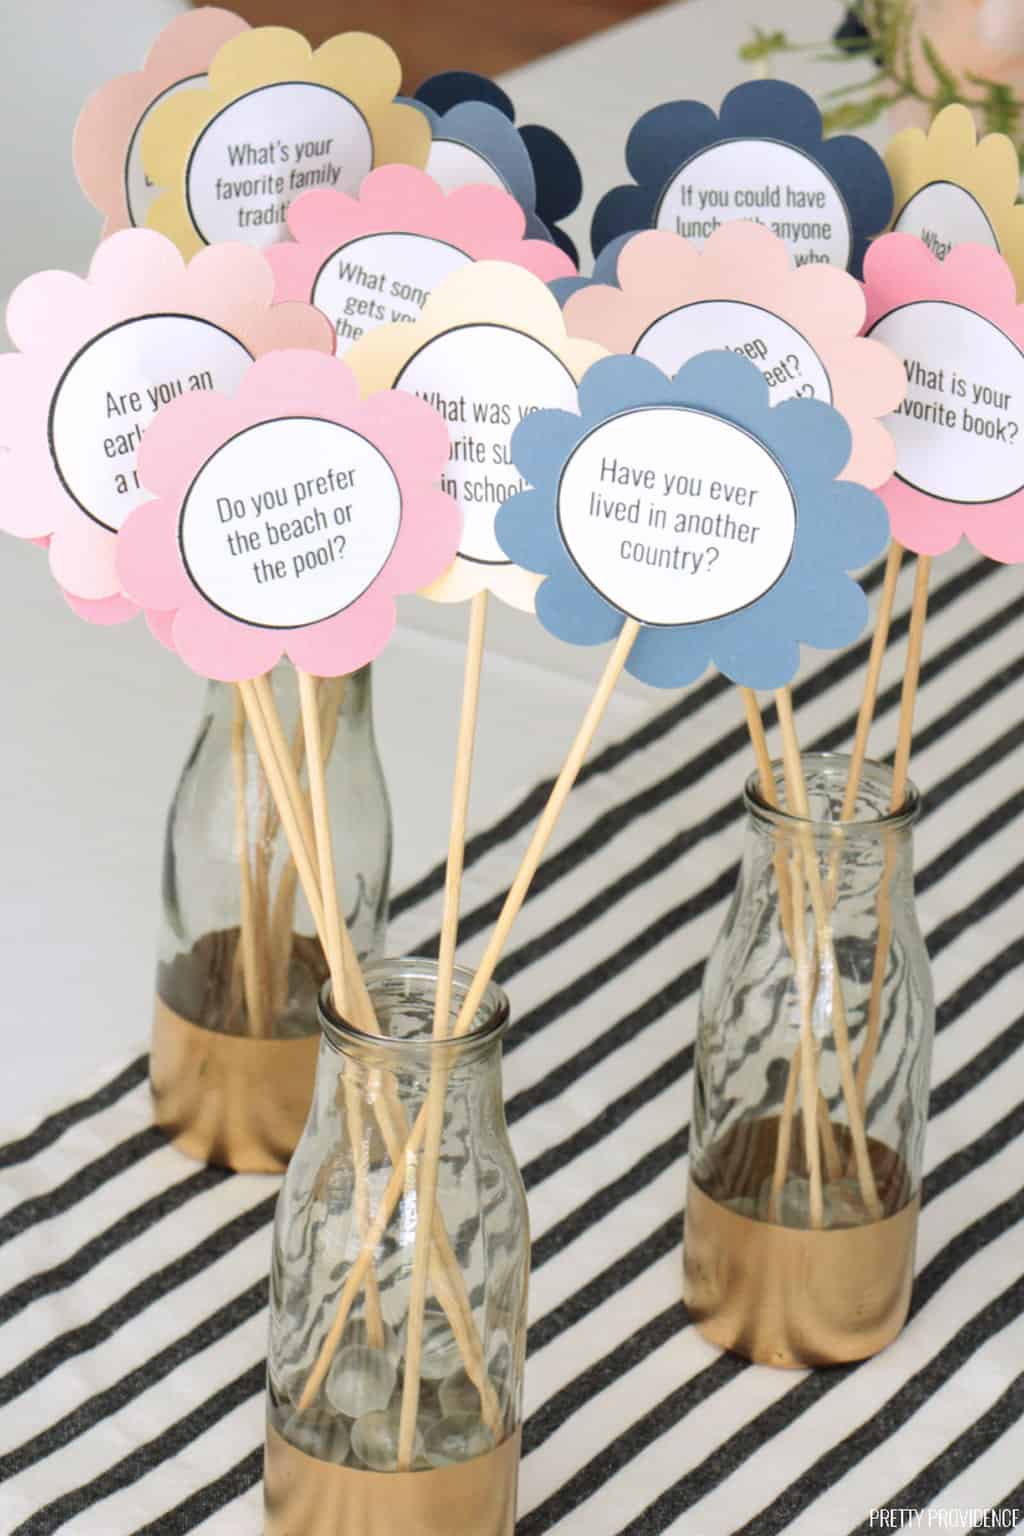 get to know you questions on paper flowers in glass vases